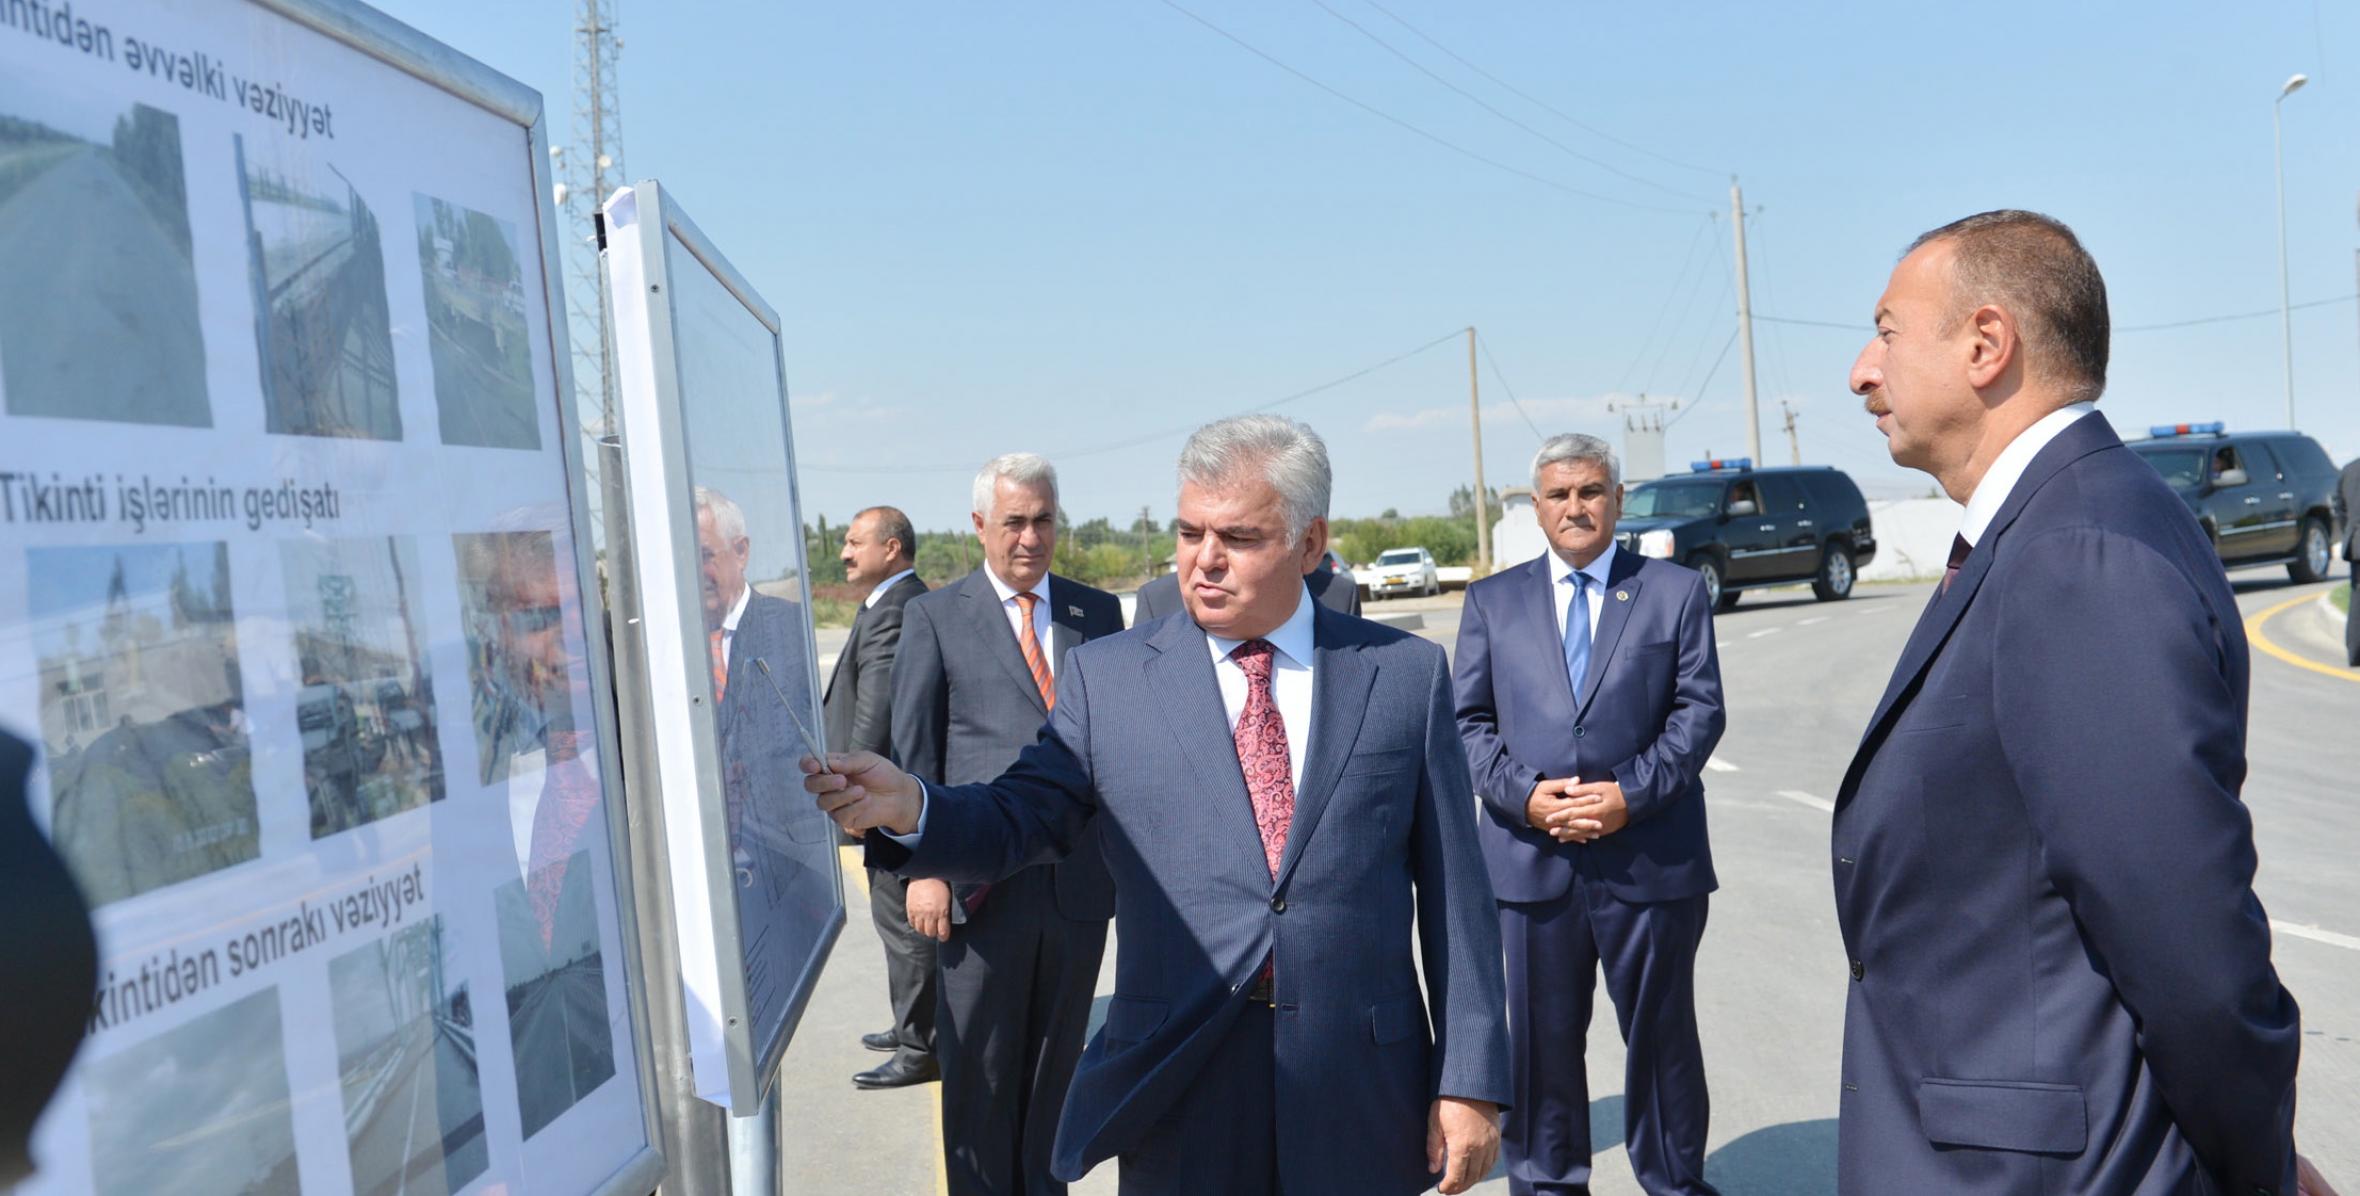 Ilham Aliyev attended the opening of the Hajigabul-Sabirabad section of the Hajigabul-Bahramtapa highway being reconstructed